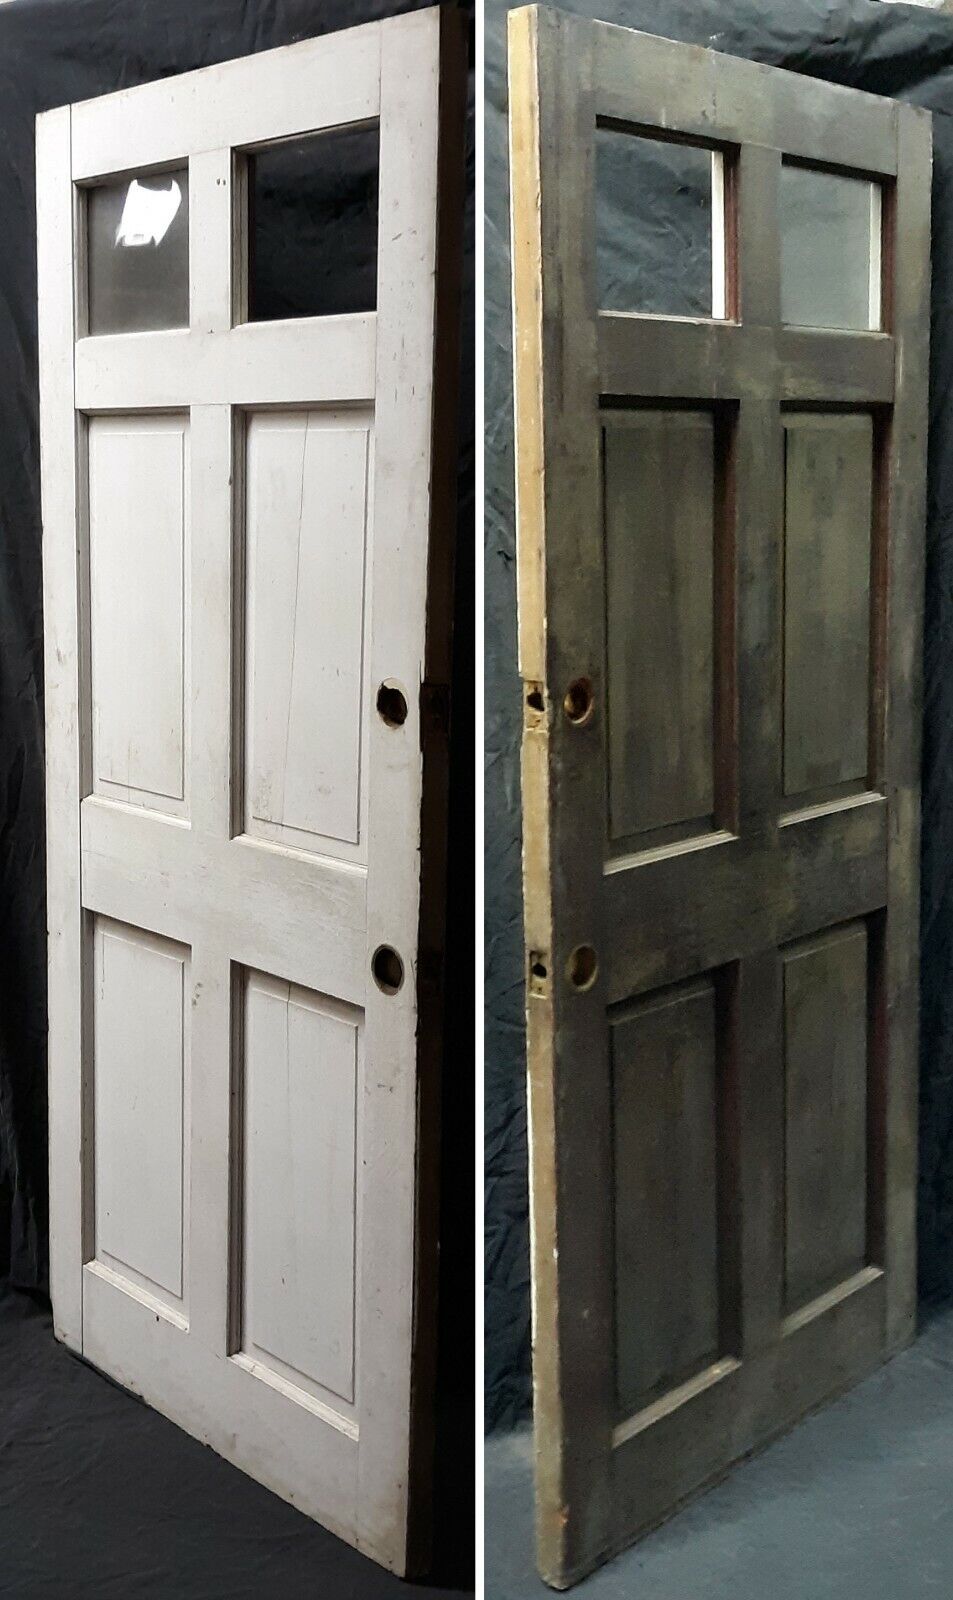 36"x77.5"x1.75" Antique Vintage Old Reclaimed Salvaged SOLID Wood Wooden Entry Door Window Glass Panels